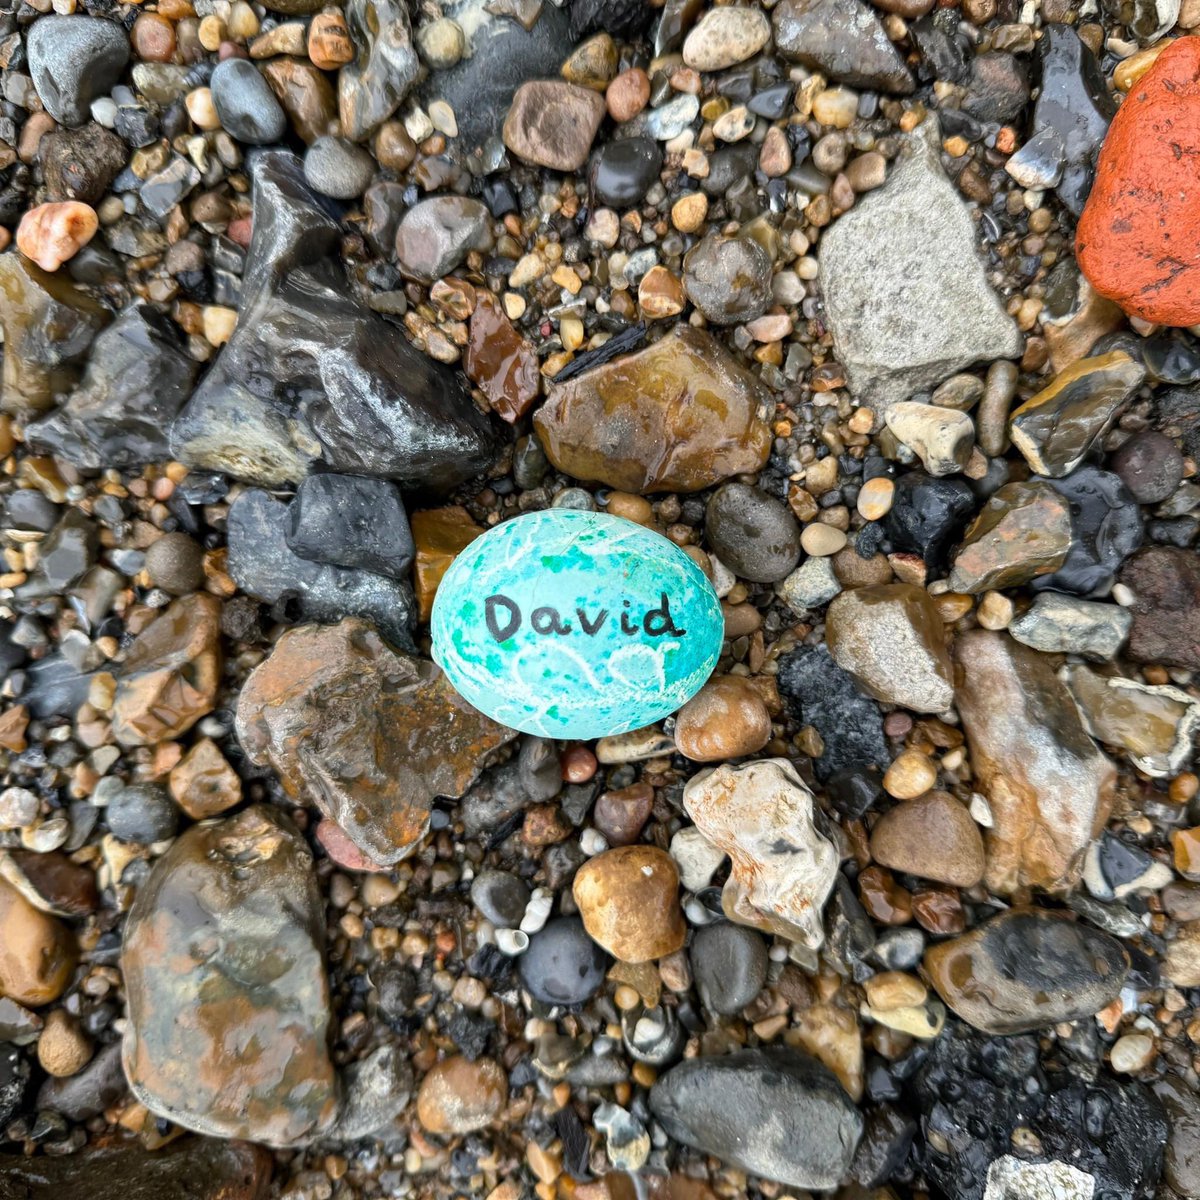 Last week I found David the Egg and he was a bit whiffy (I think he'd been bobbing around in the river since Easter). #Mudlark #Mudlarking #Larking